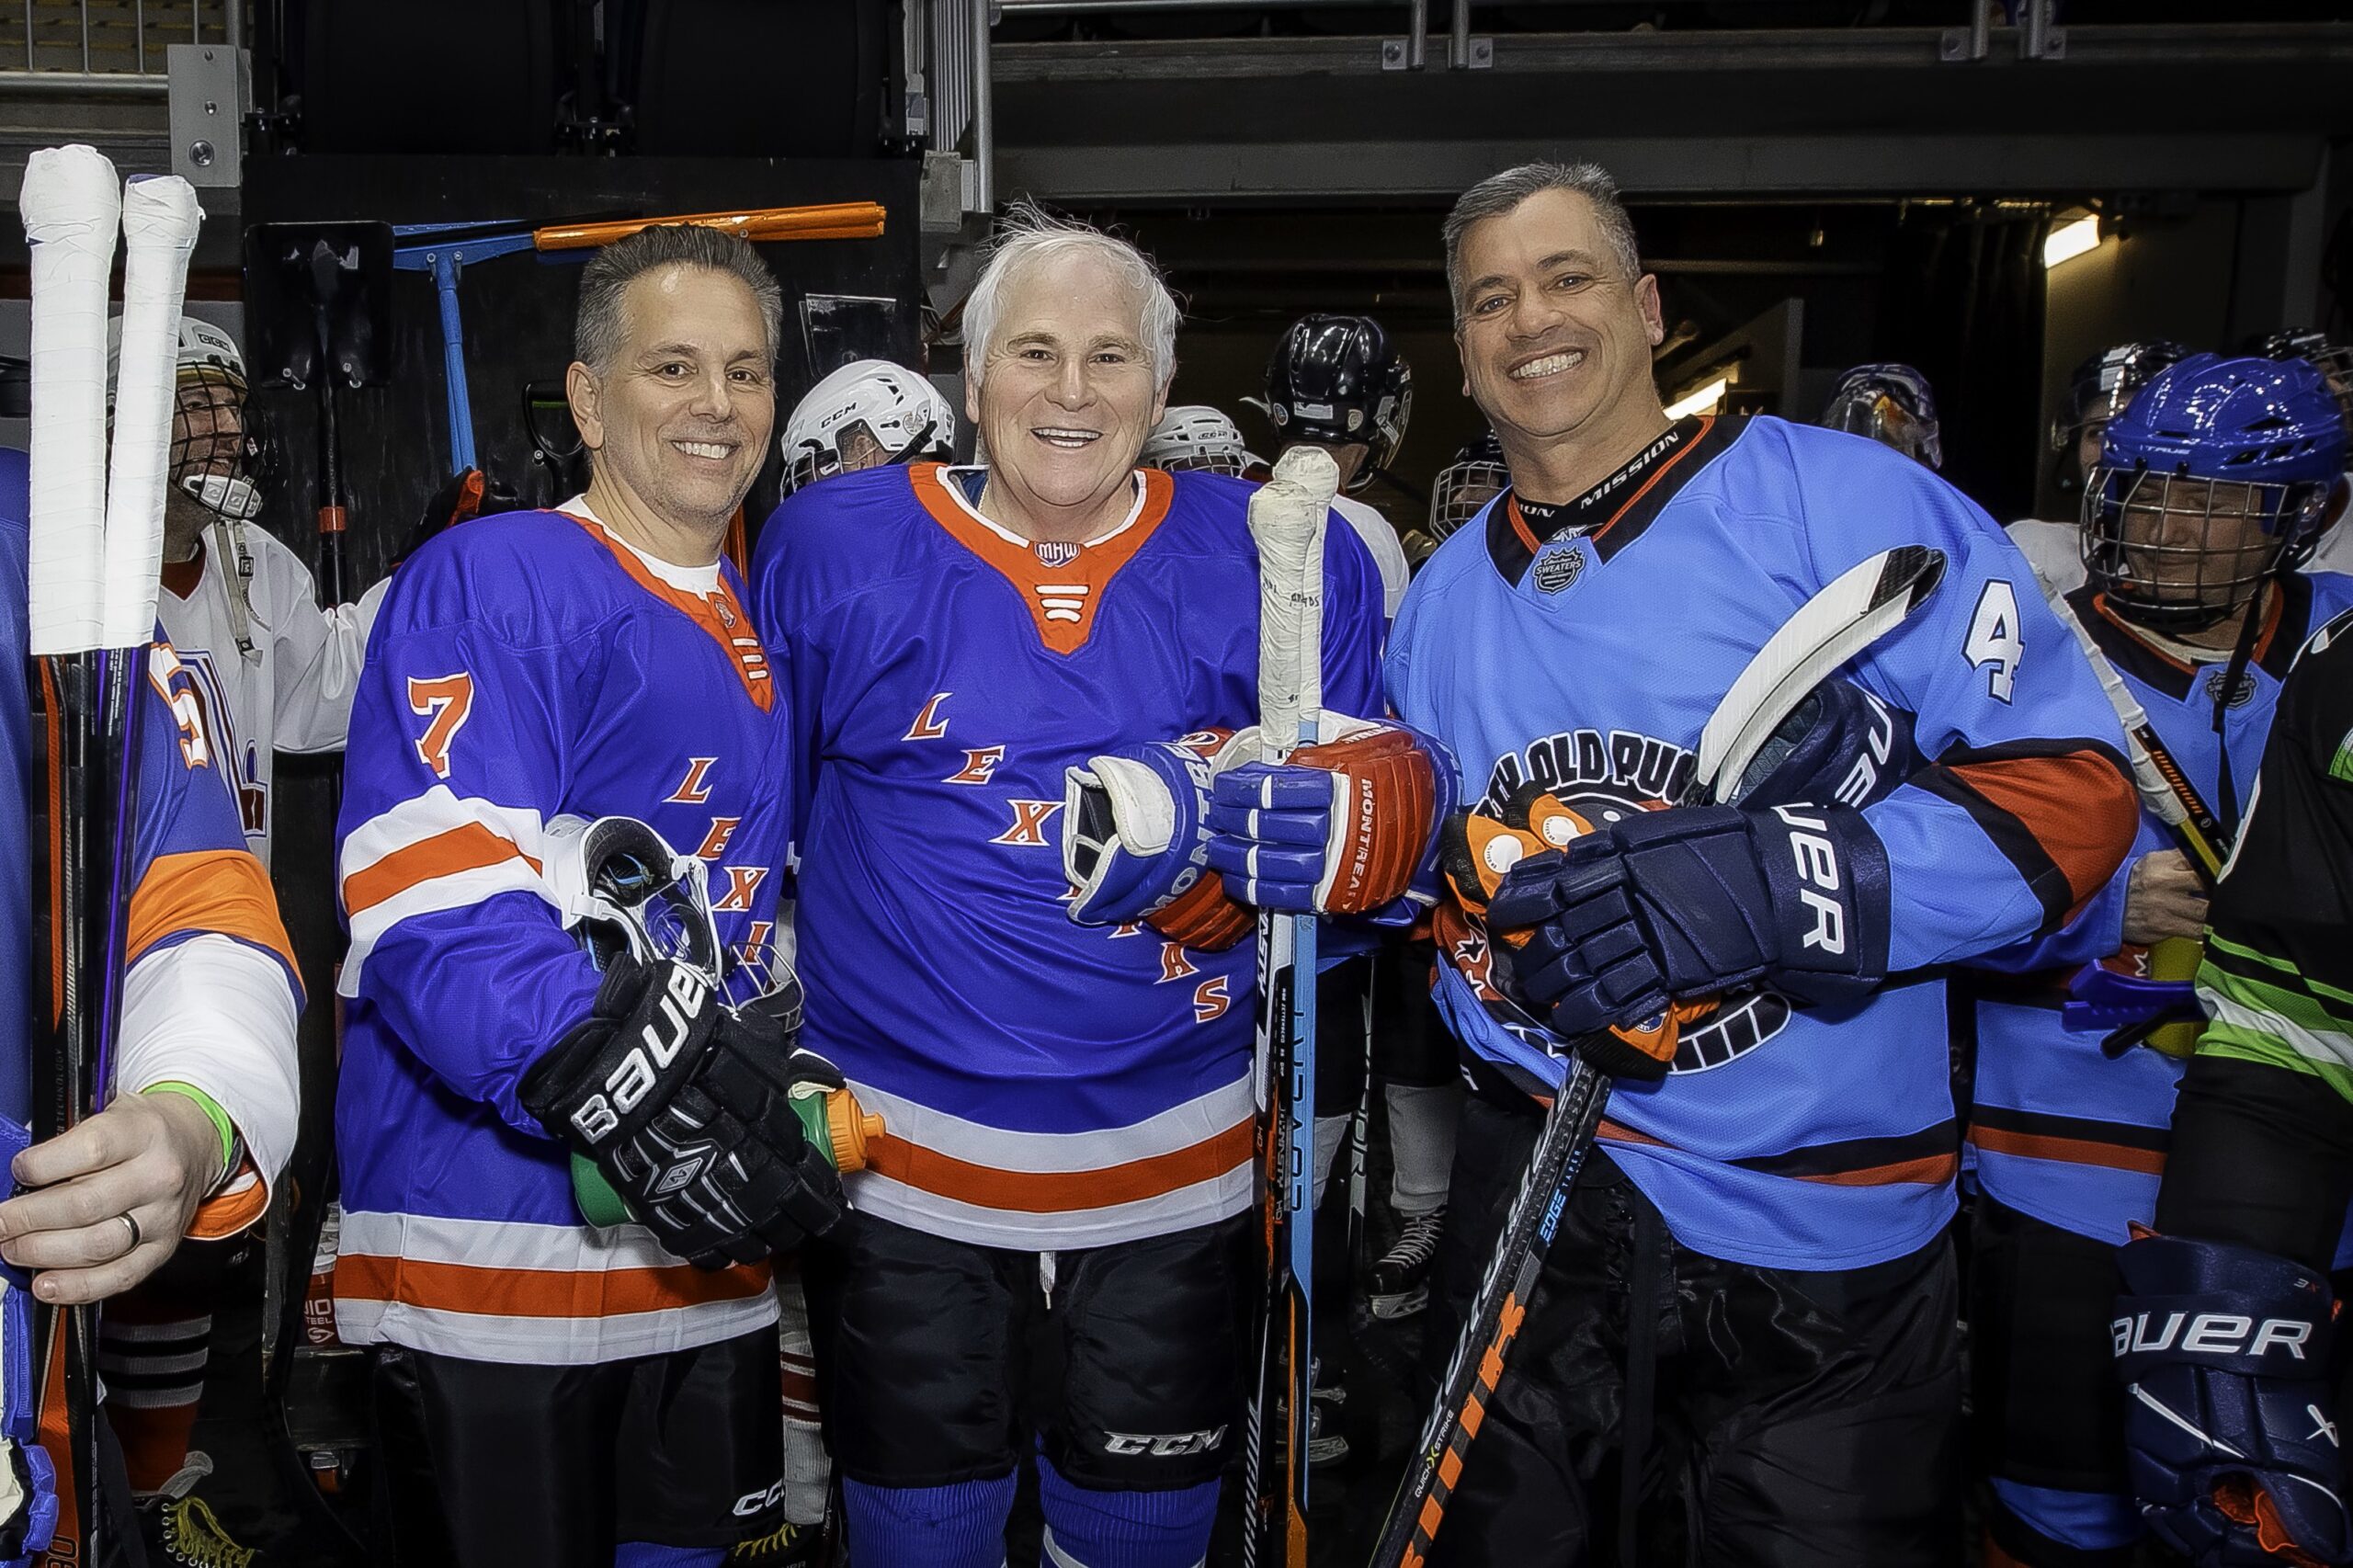 From left to right: John Dalli, president-elect of the Columbian Lawyers Association; Hon. Alan Schenkman, the former presiding justice of the Appellate Division, Second Department; and Robert Mazzuchin come together on the ice at UBS Arena, showcasing the legal community's dedication to supporting charitable causes through the sport of hockey at Tunnel to Towers hockey game. Photos courtesy of John Dalli